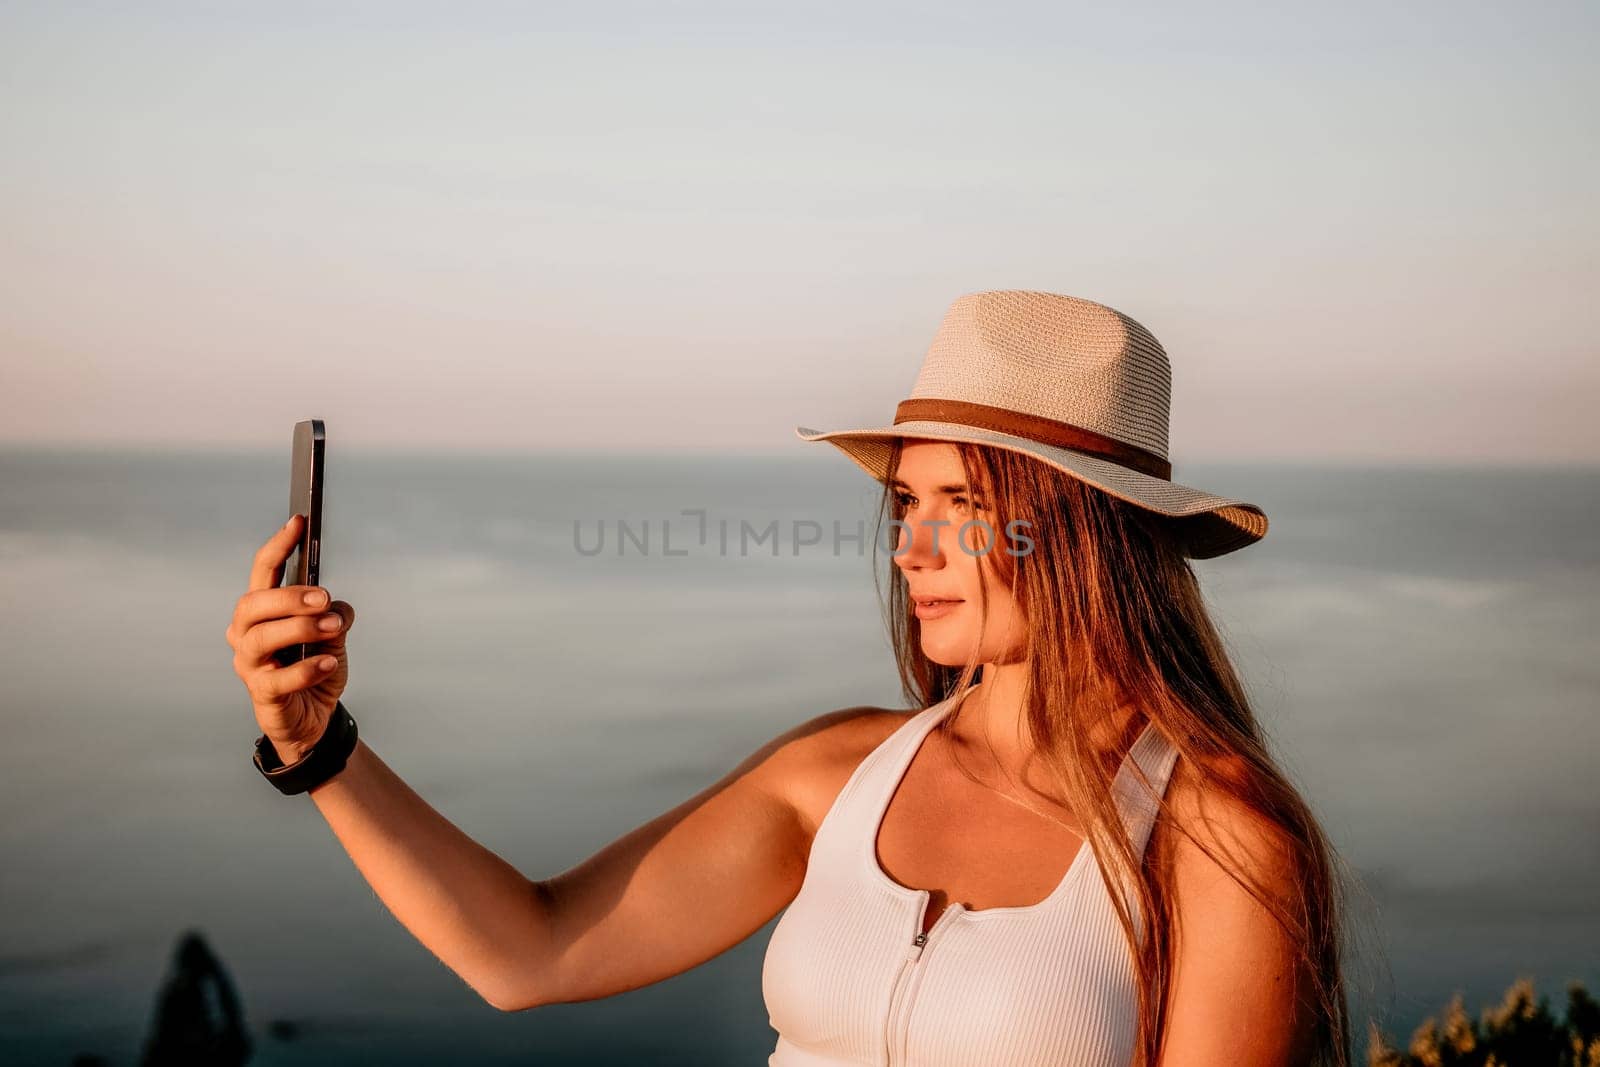 Woman travel sea. Happy tourist in hat enjoy taking picture outdoors for memories. Woman traveler posing on the beach at sea surrounded by volcanic mountains, sharing travel adventure journey. by panophotograph